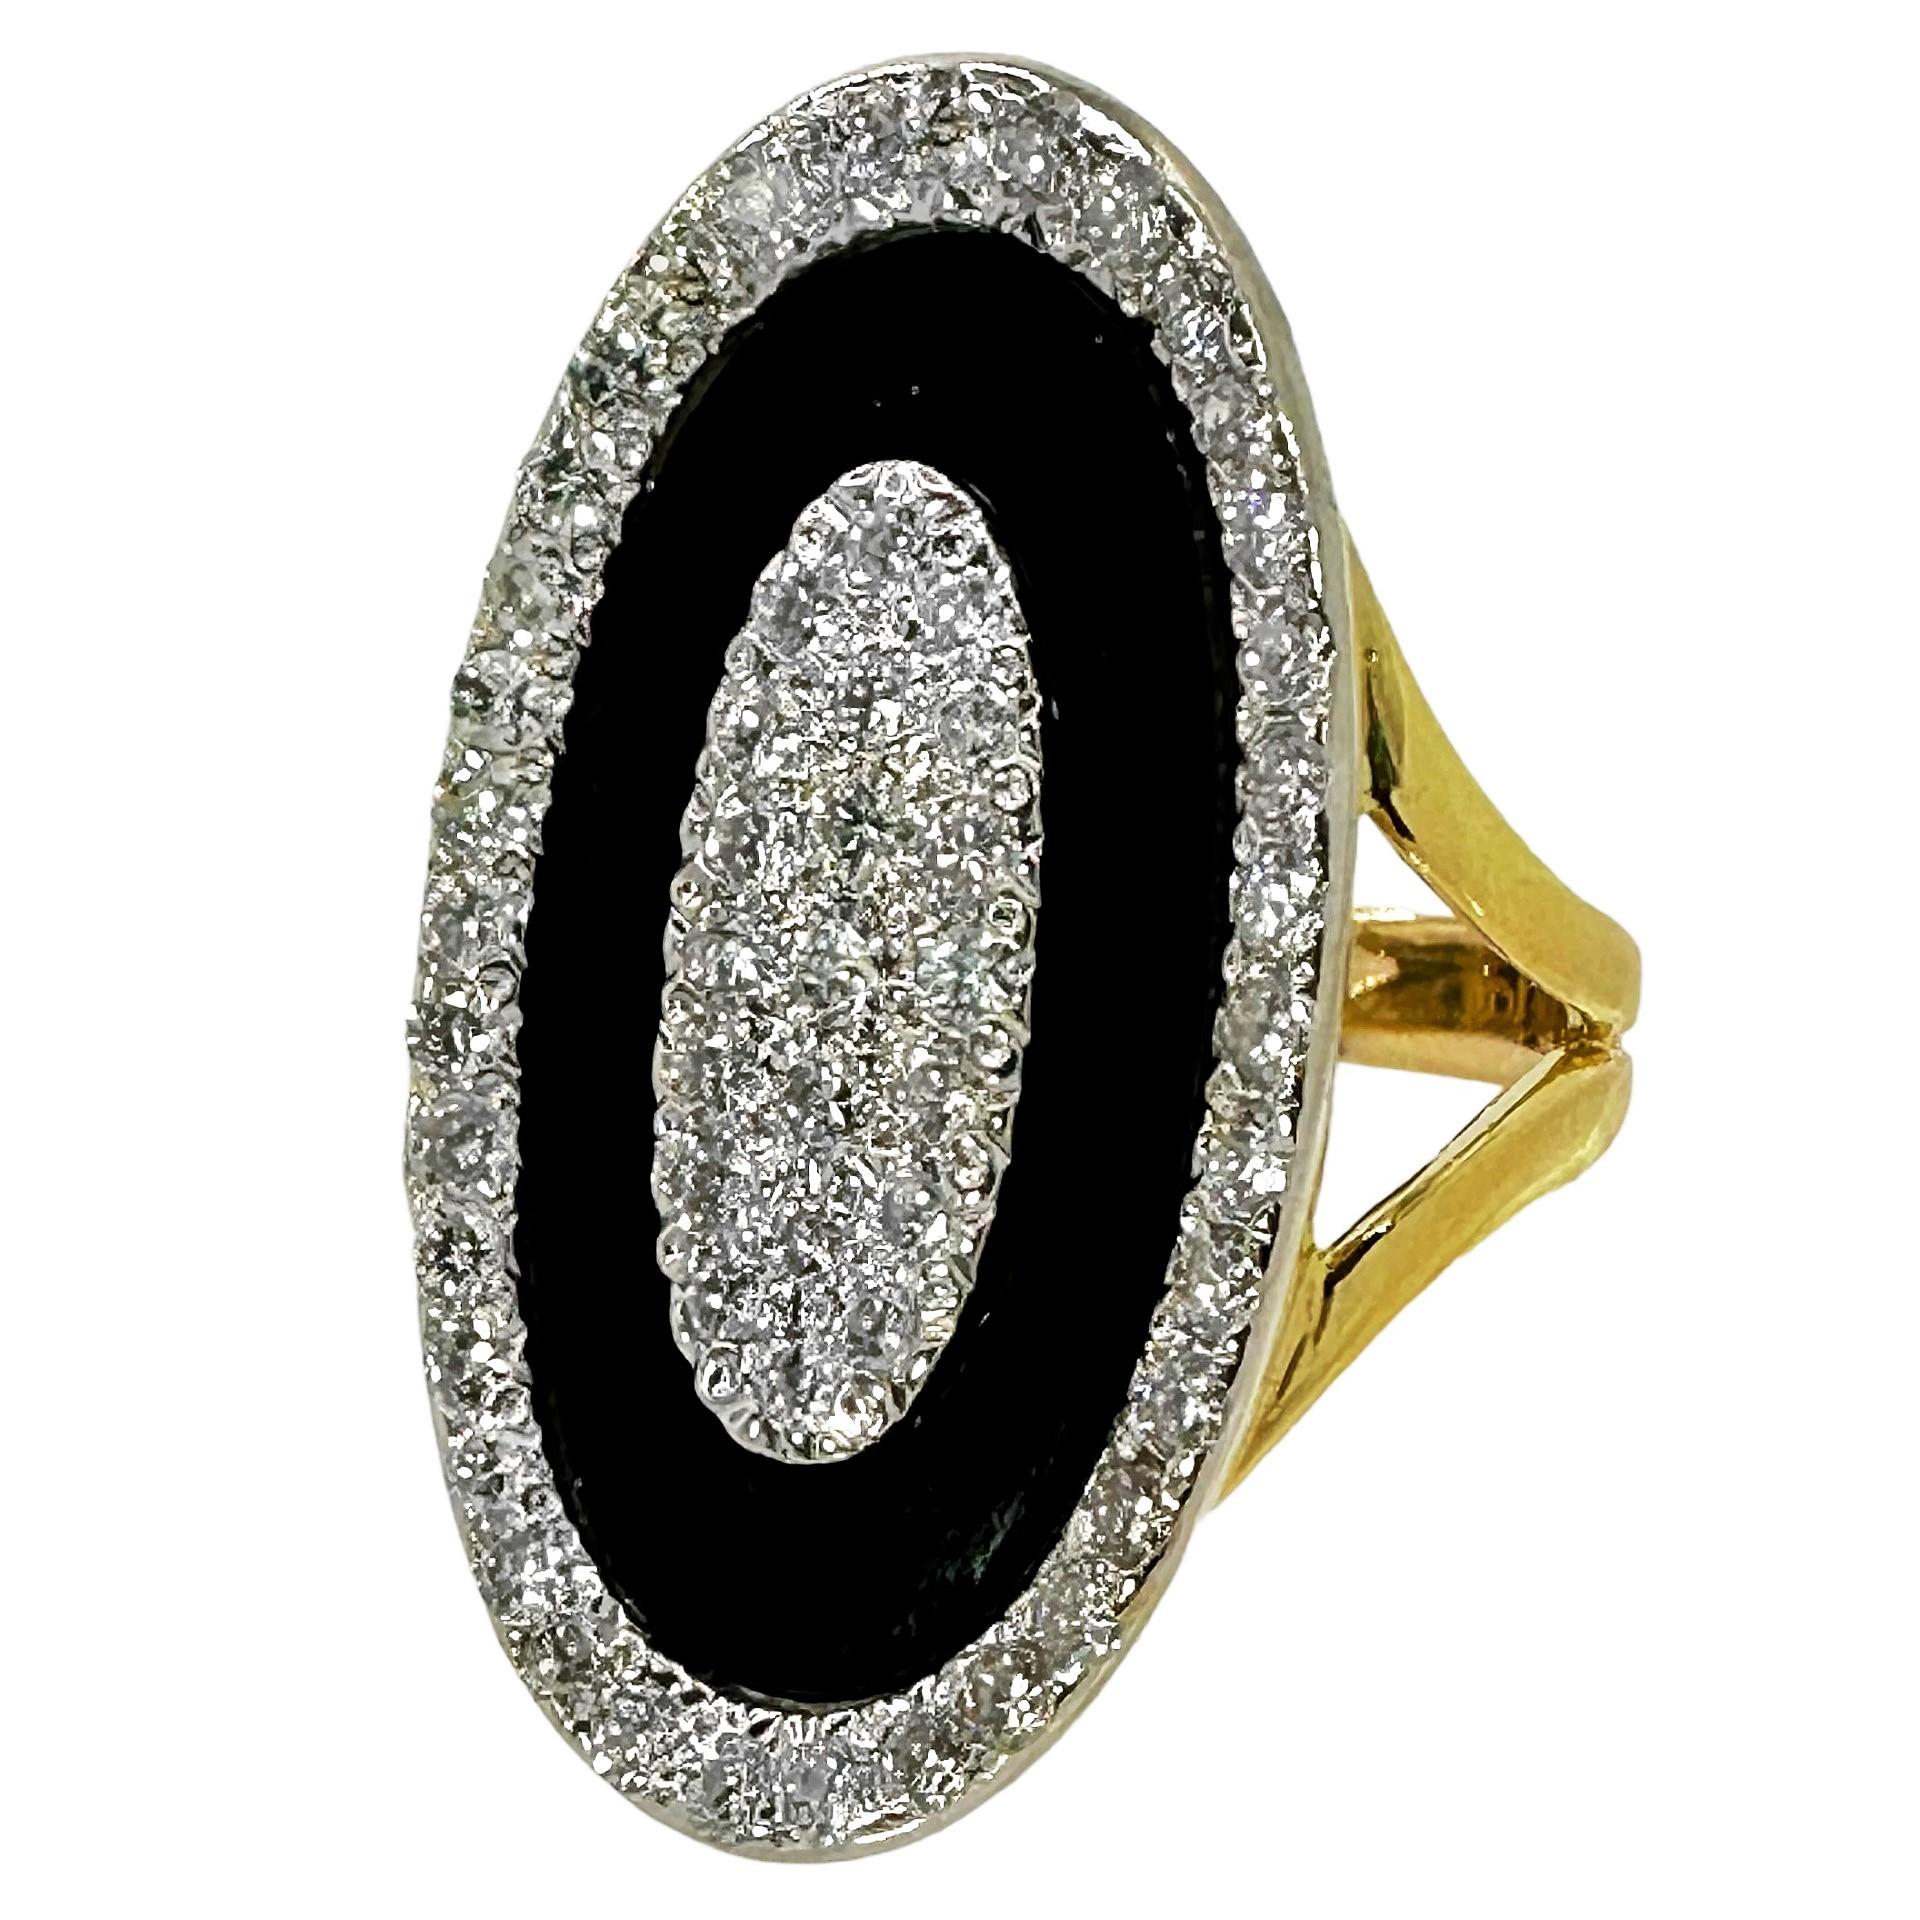 Women's Onyx, Diamond and 18K Gold, Oval Shaped Ring, 1.25 Inches Long by .75 Inch Wide For Sale